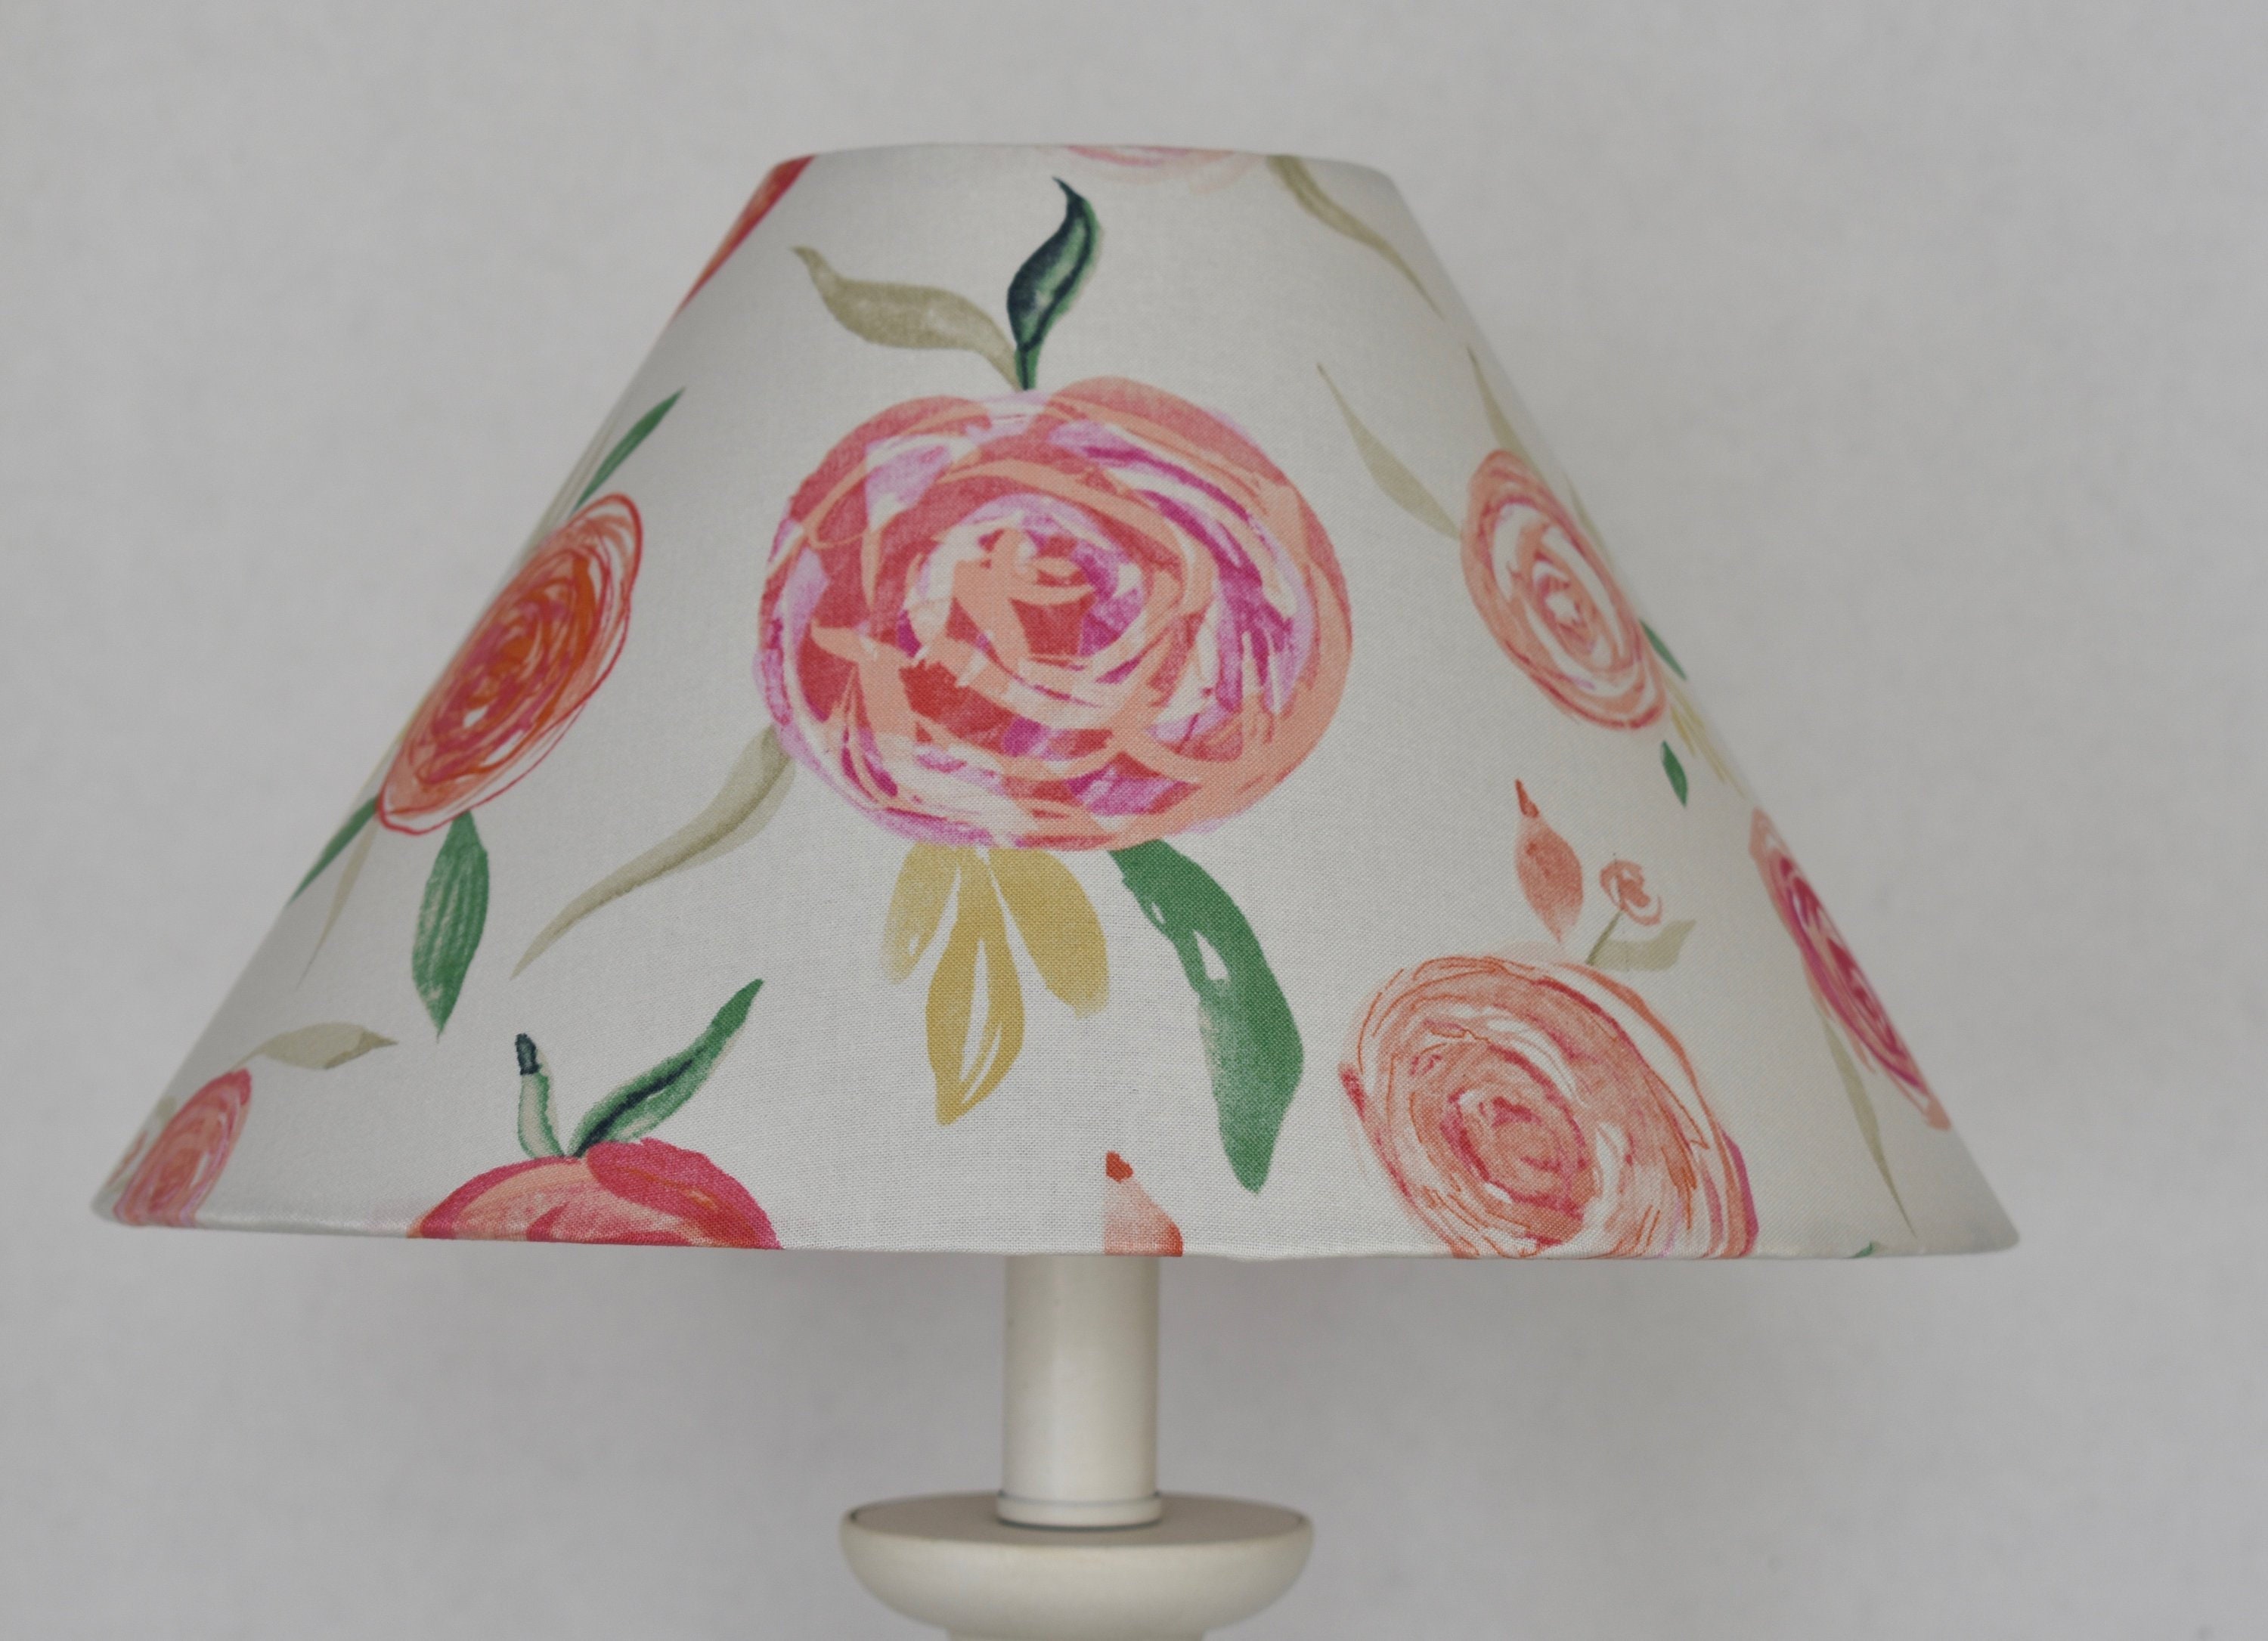 pink lamp shade for nursery